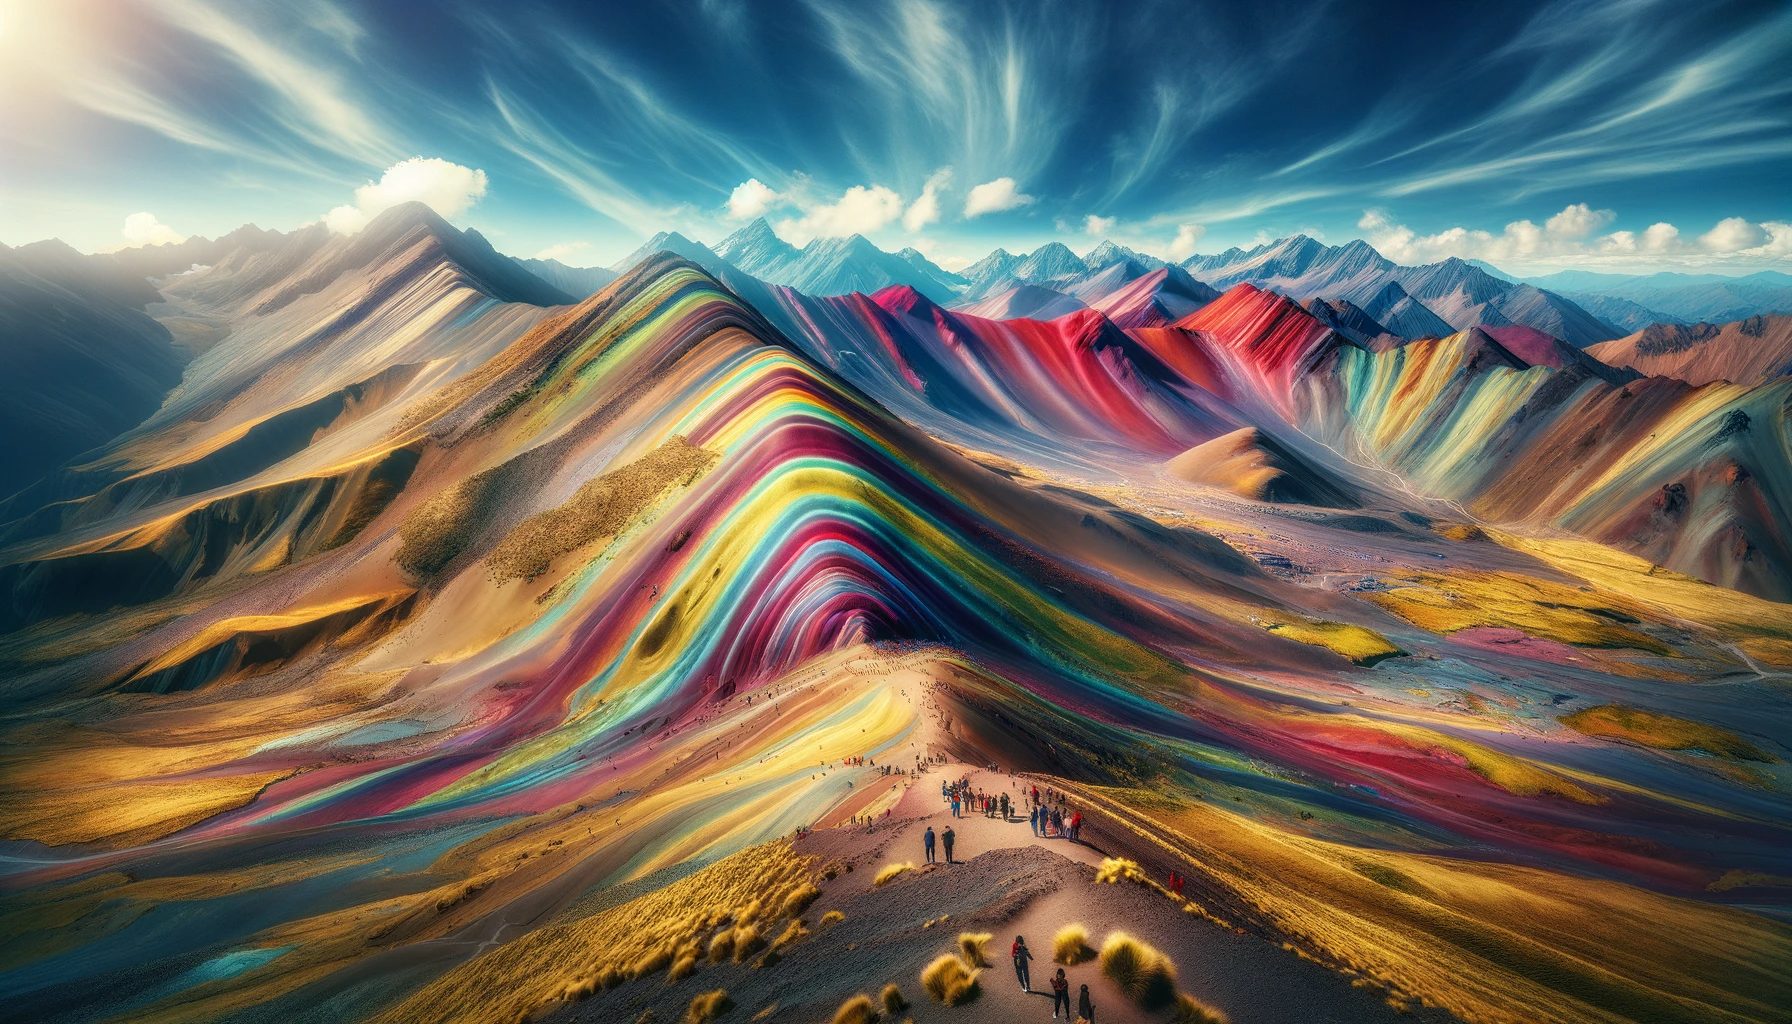 Colorful mountain landscape with visitors exploring.